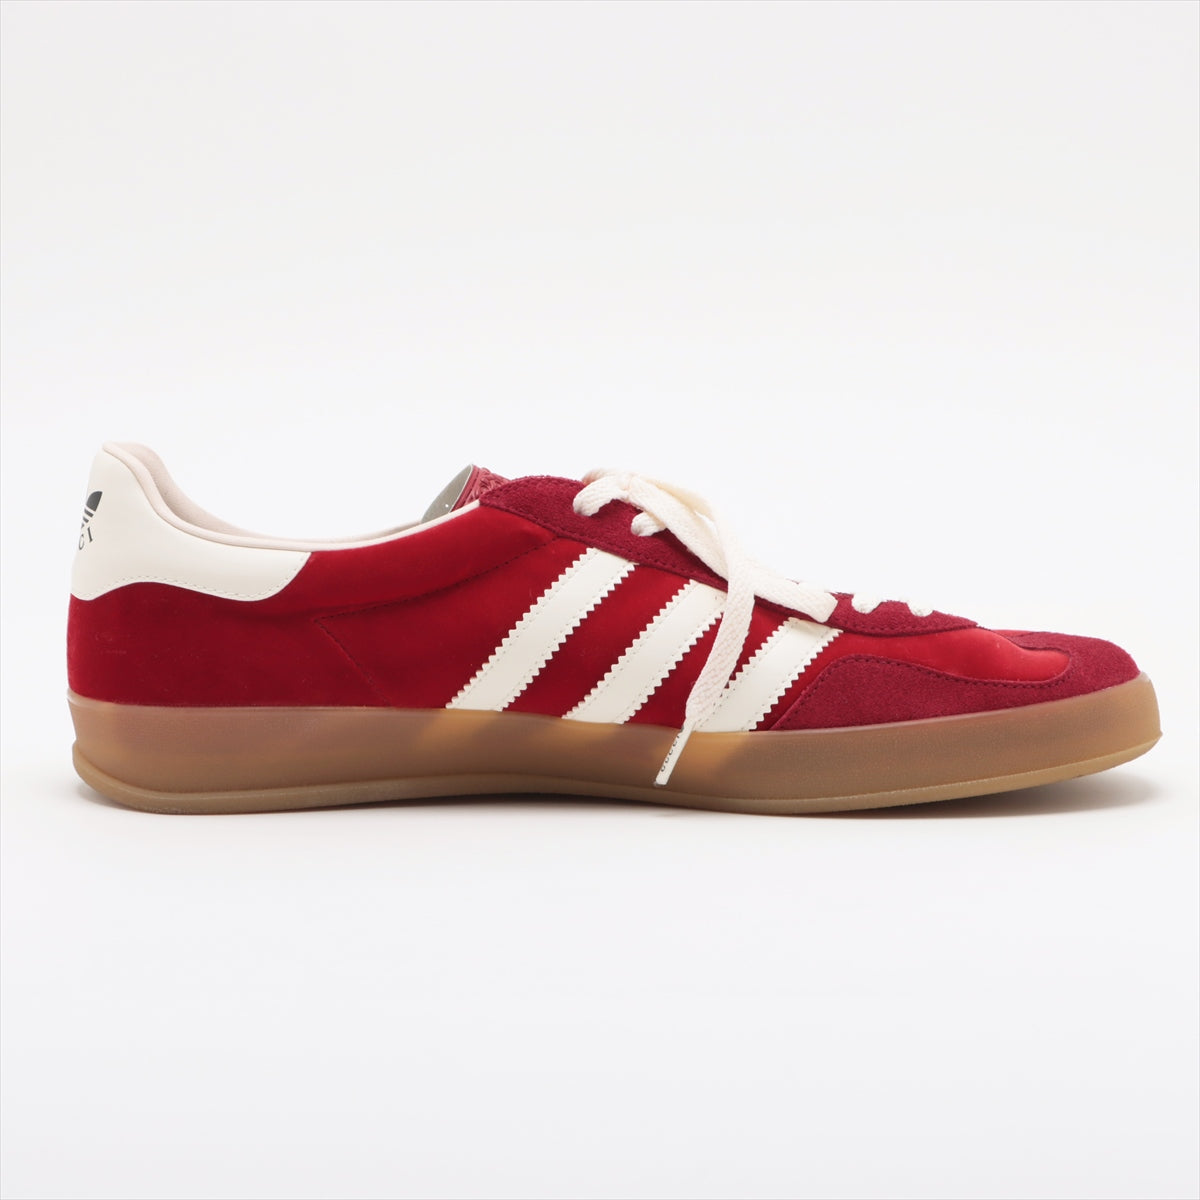 Gucci x adidas Velour & leather Sneakers 30cm Men's Red x white HQ8853 Gazelle Is there a replacement string